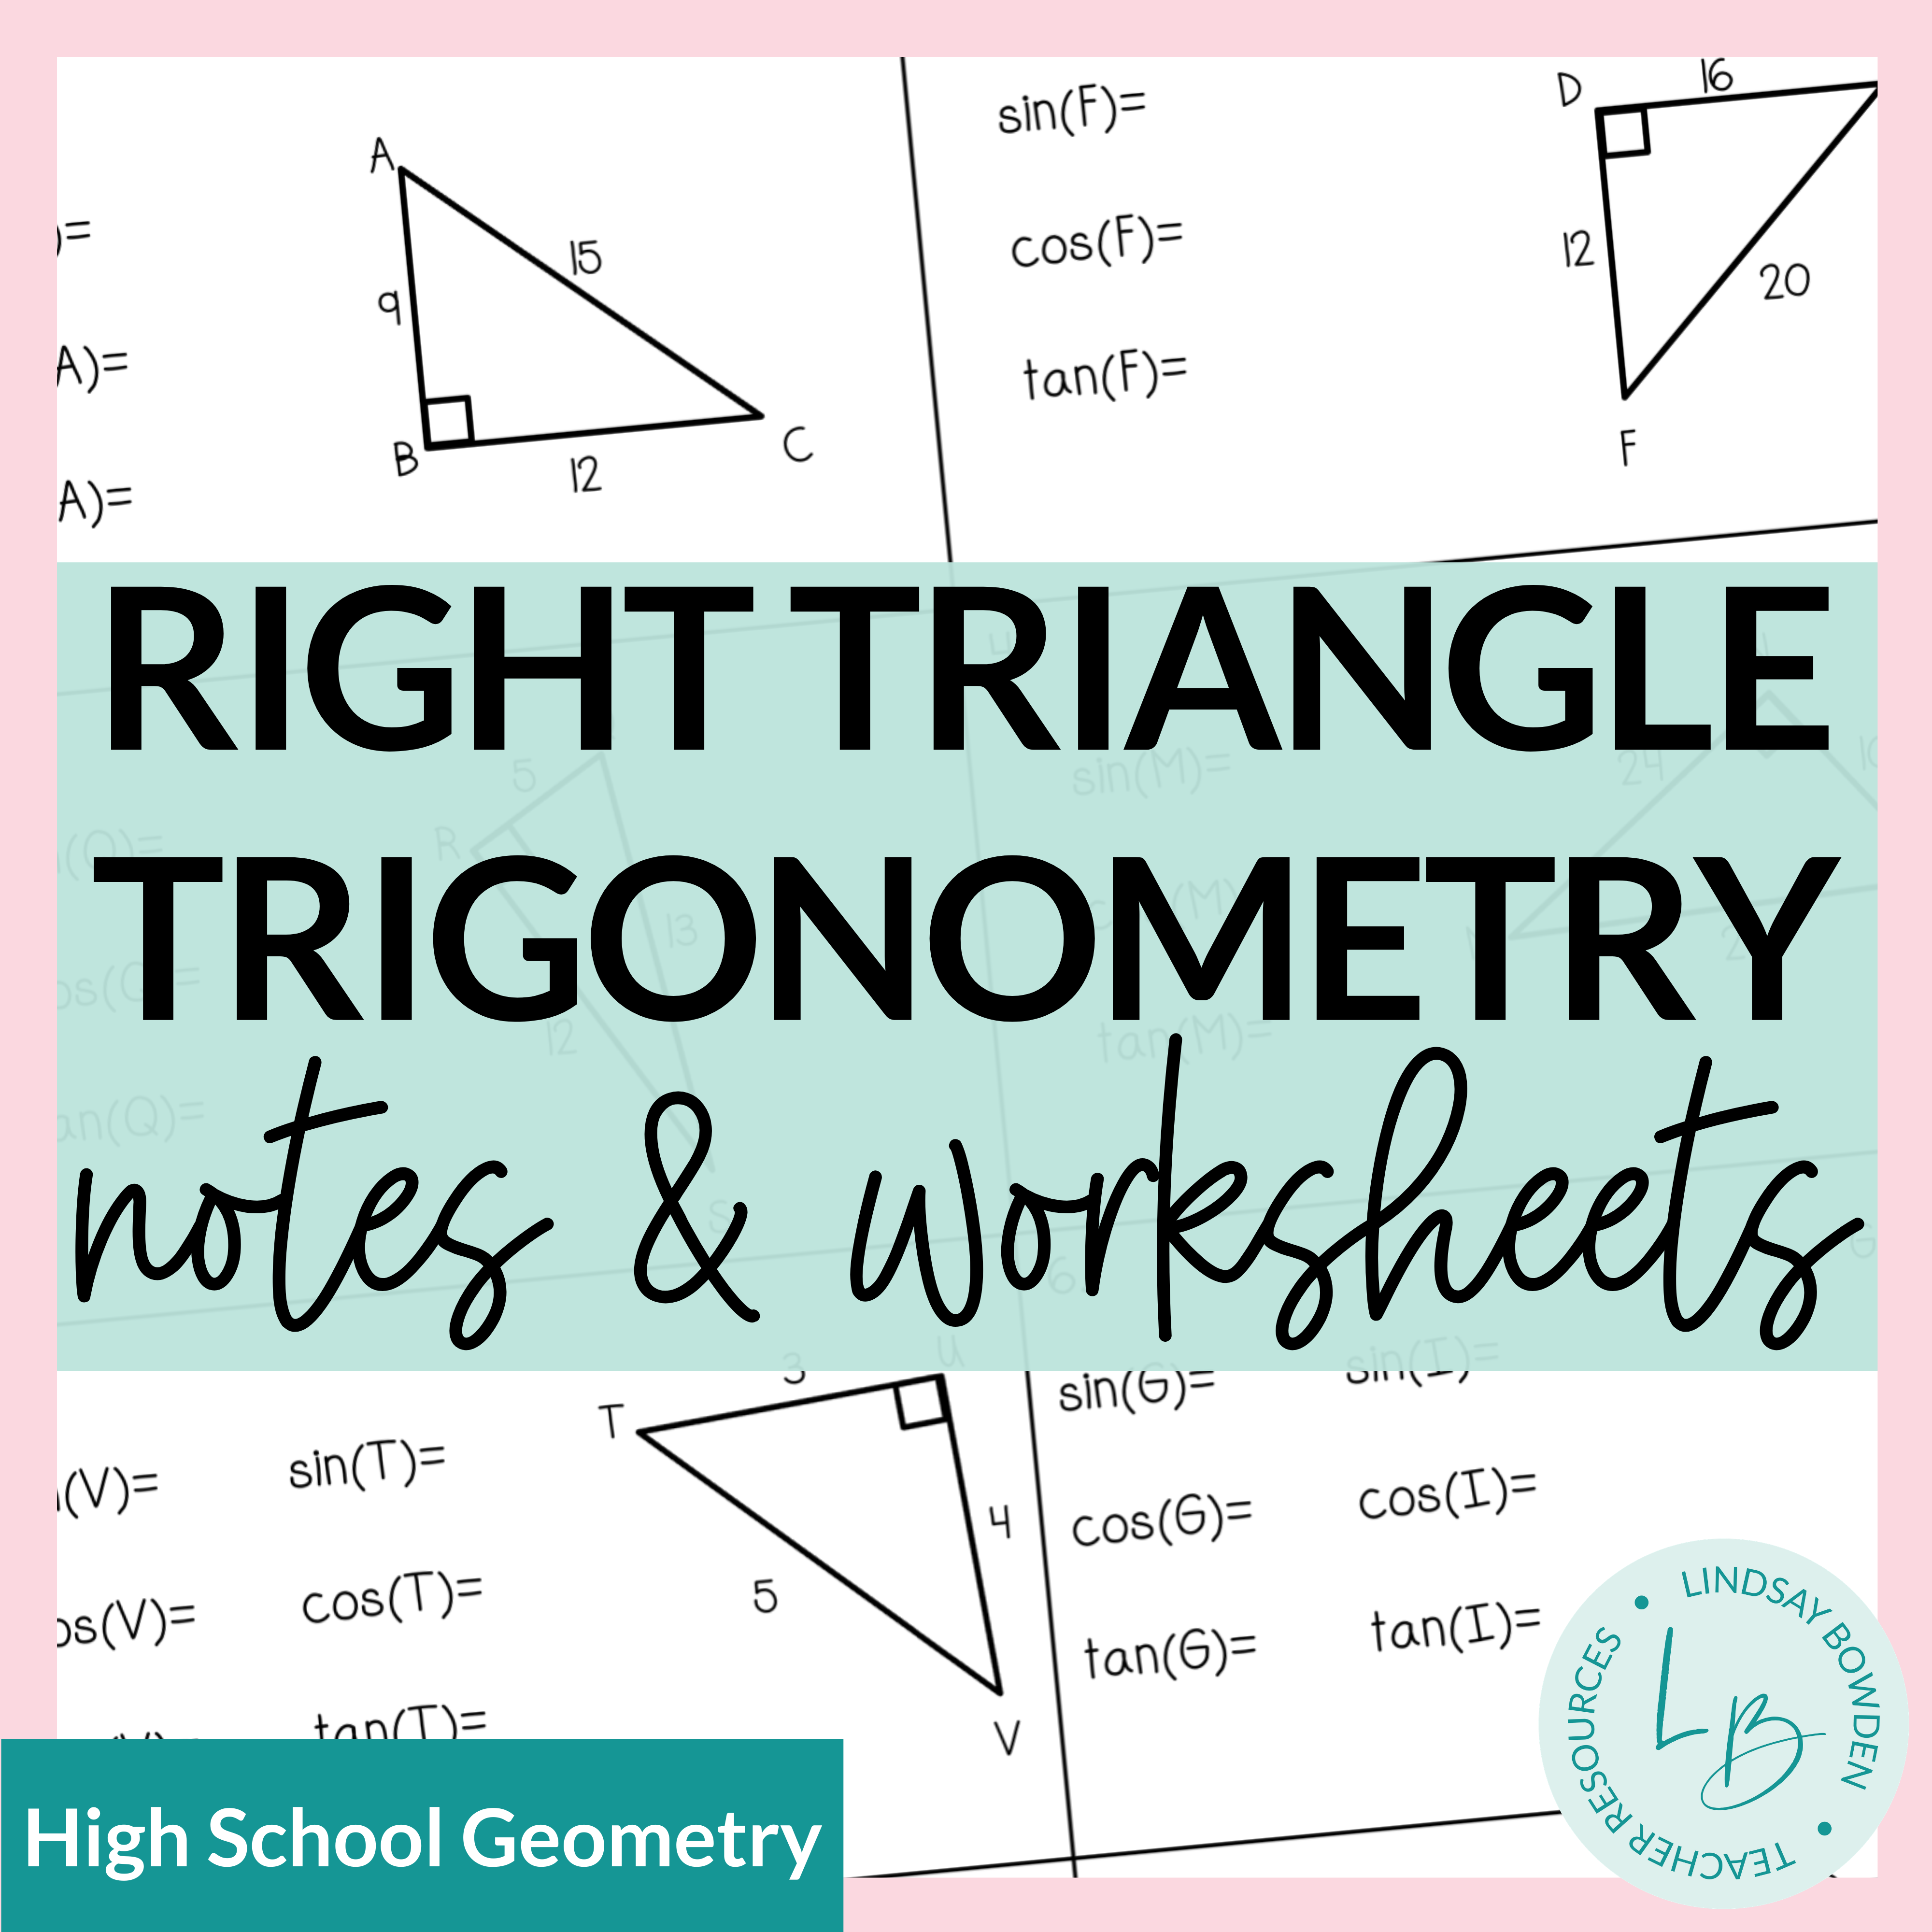 Right Triangle Trigonometry Notes and Worksheets - Lindsay Bowden Intended For Right Triangle Trig Worksheet Answers